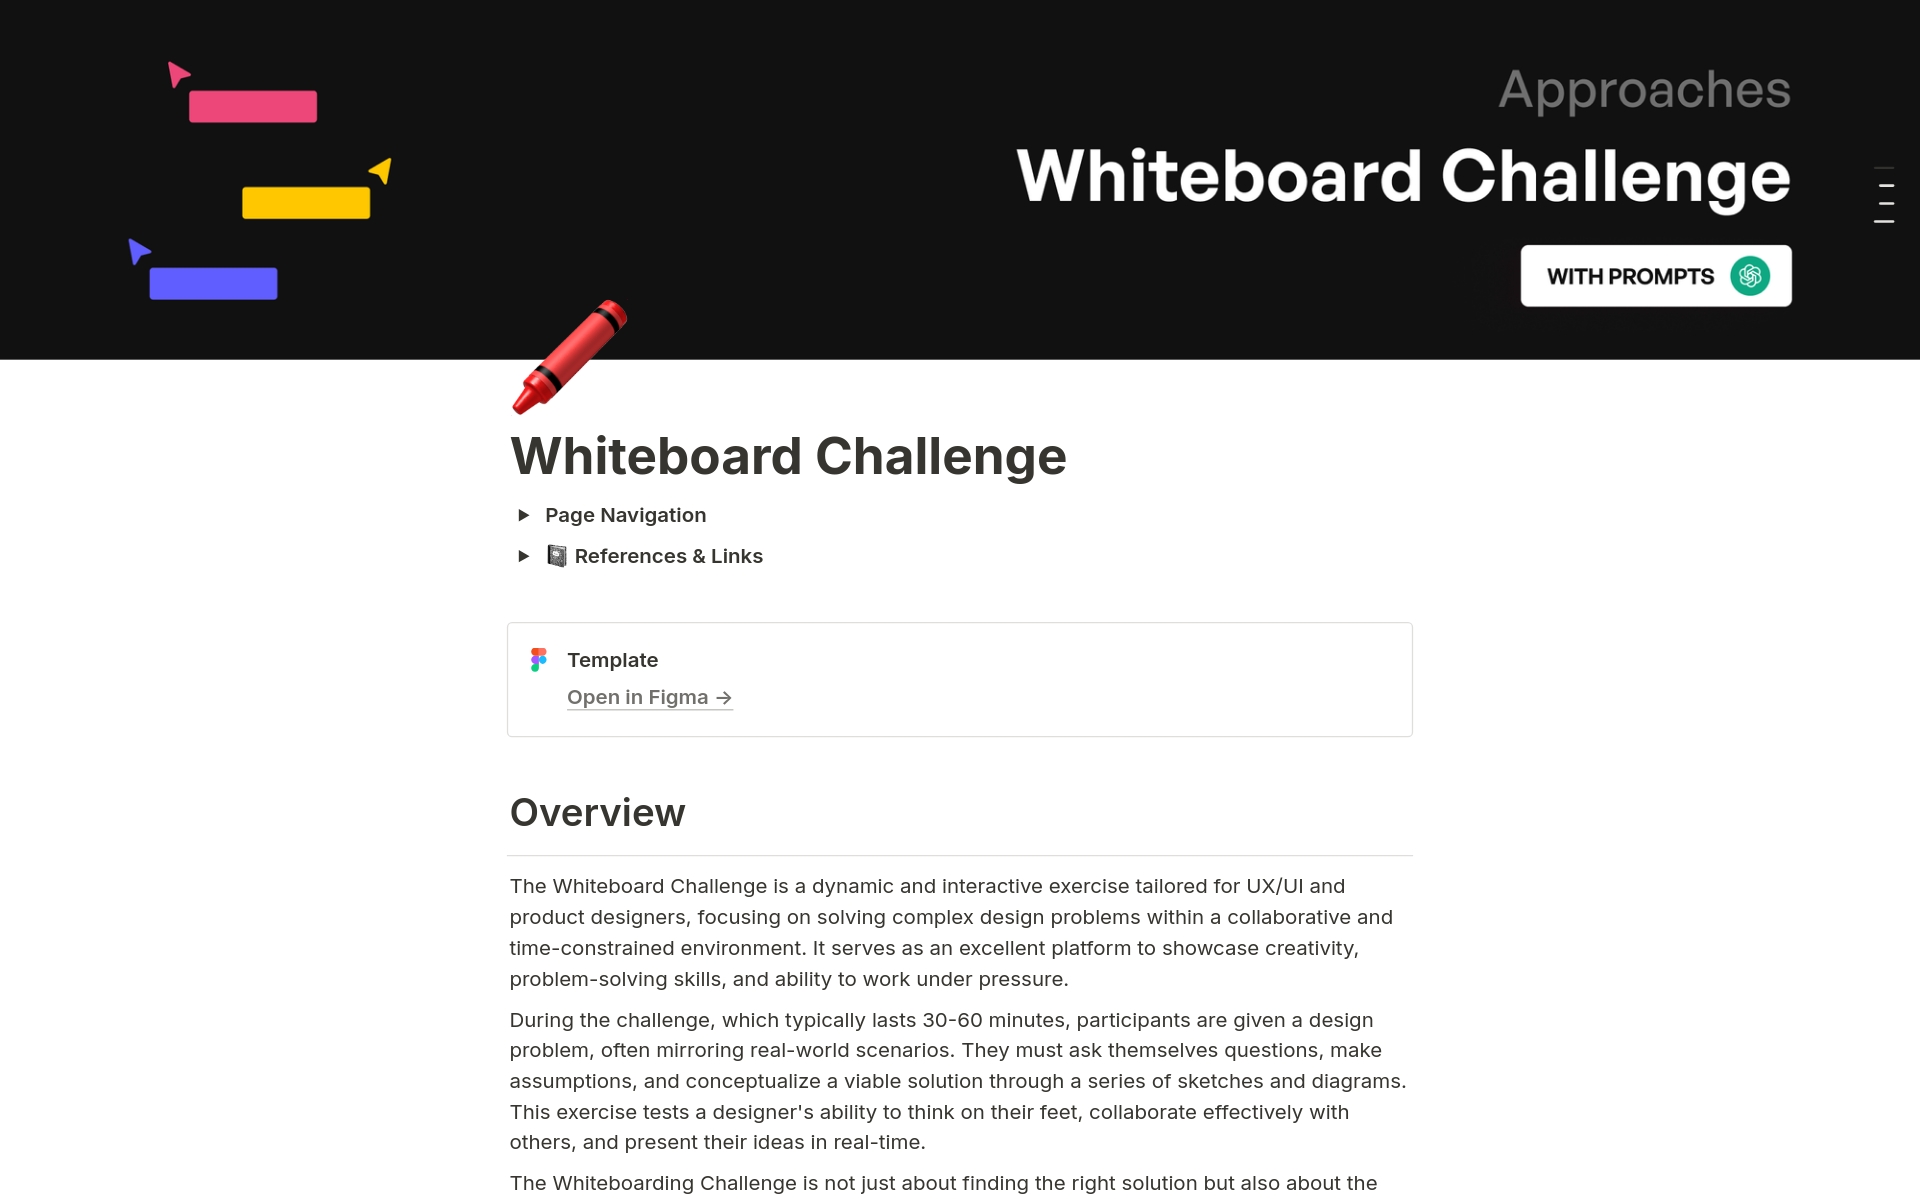 Solve design challenges in seconds, learn more about your audience, and perfect your problem-solving skills with our tailored & super-consistent ChatGPT prompts for whiteboarding challenges. Note: This template is included in the UXChunks Notion Manual @ https://uxchunks.com